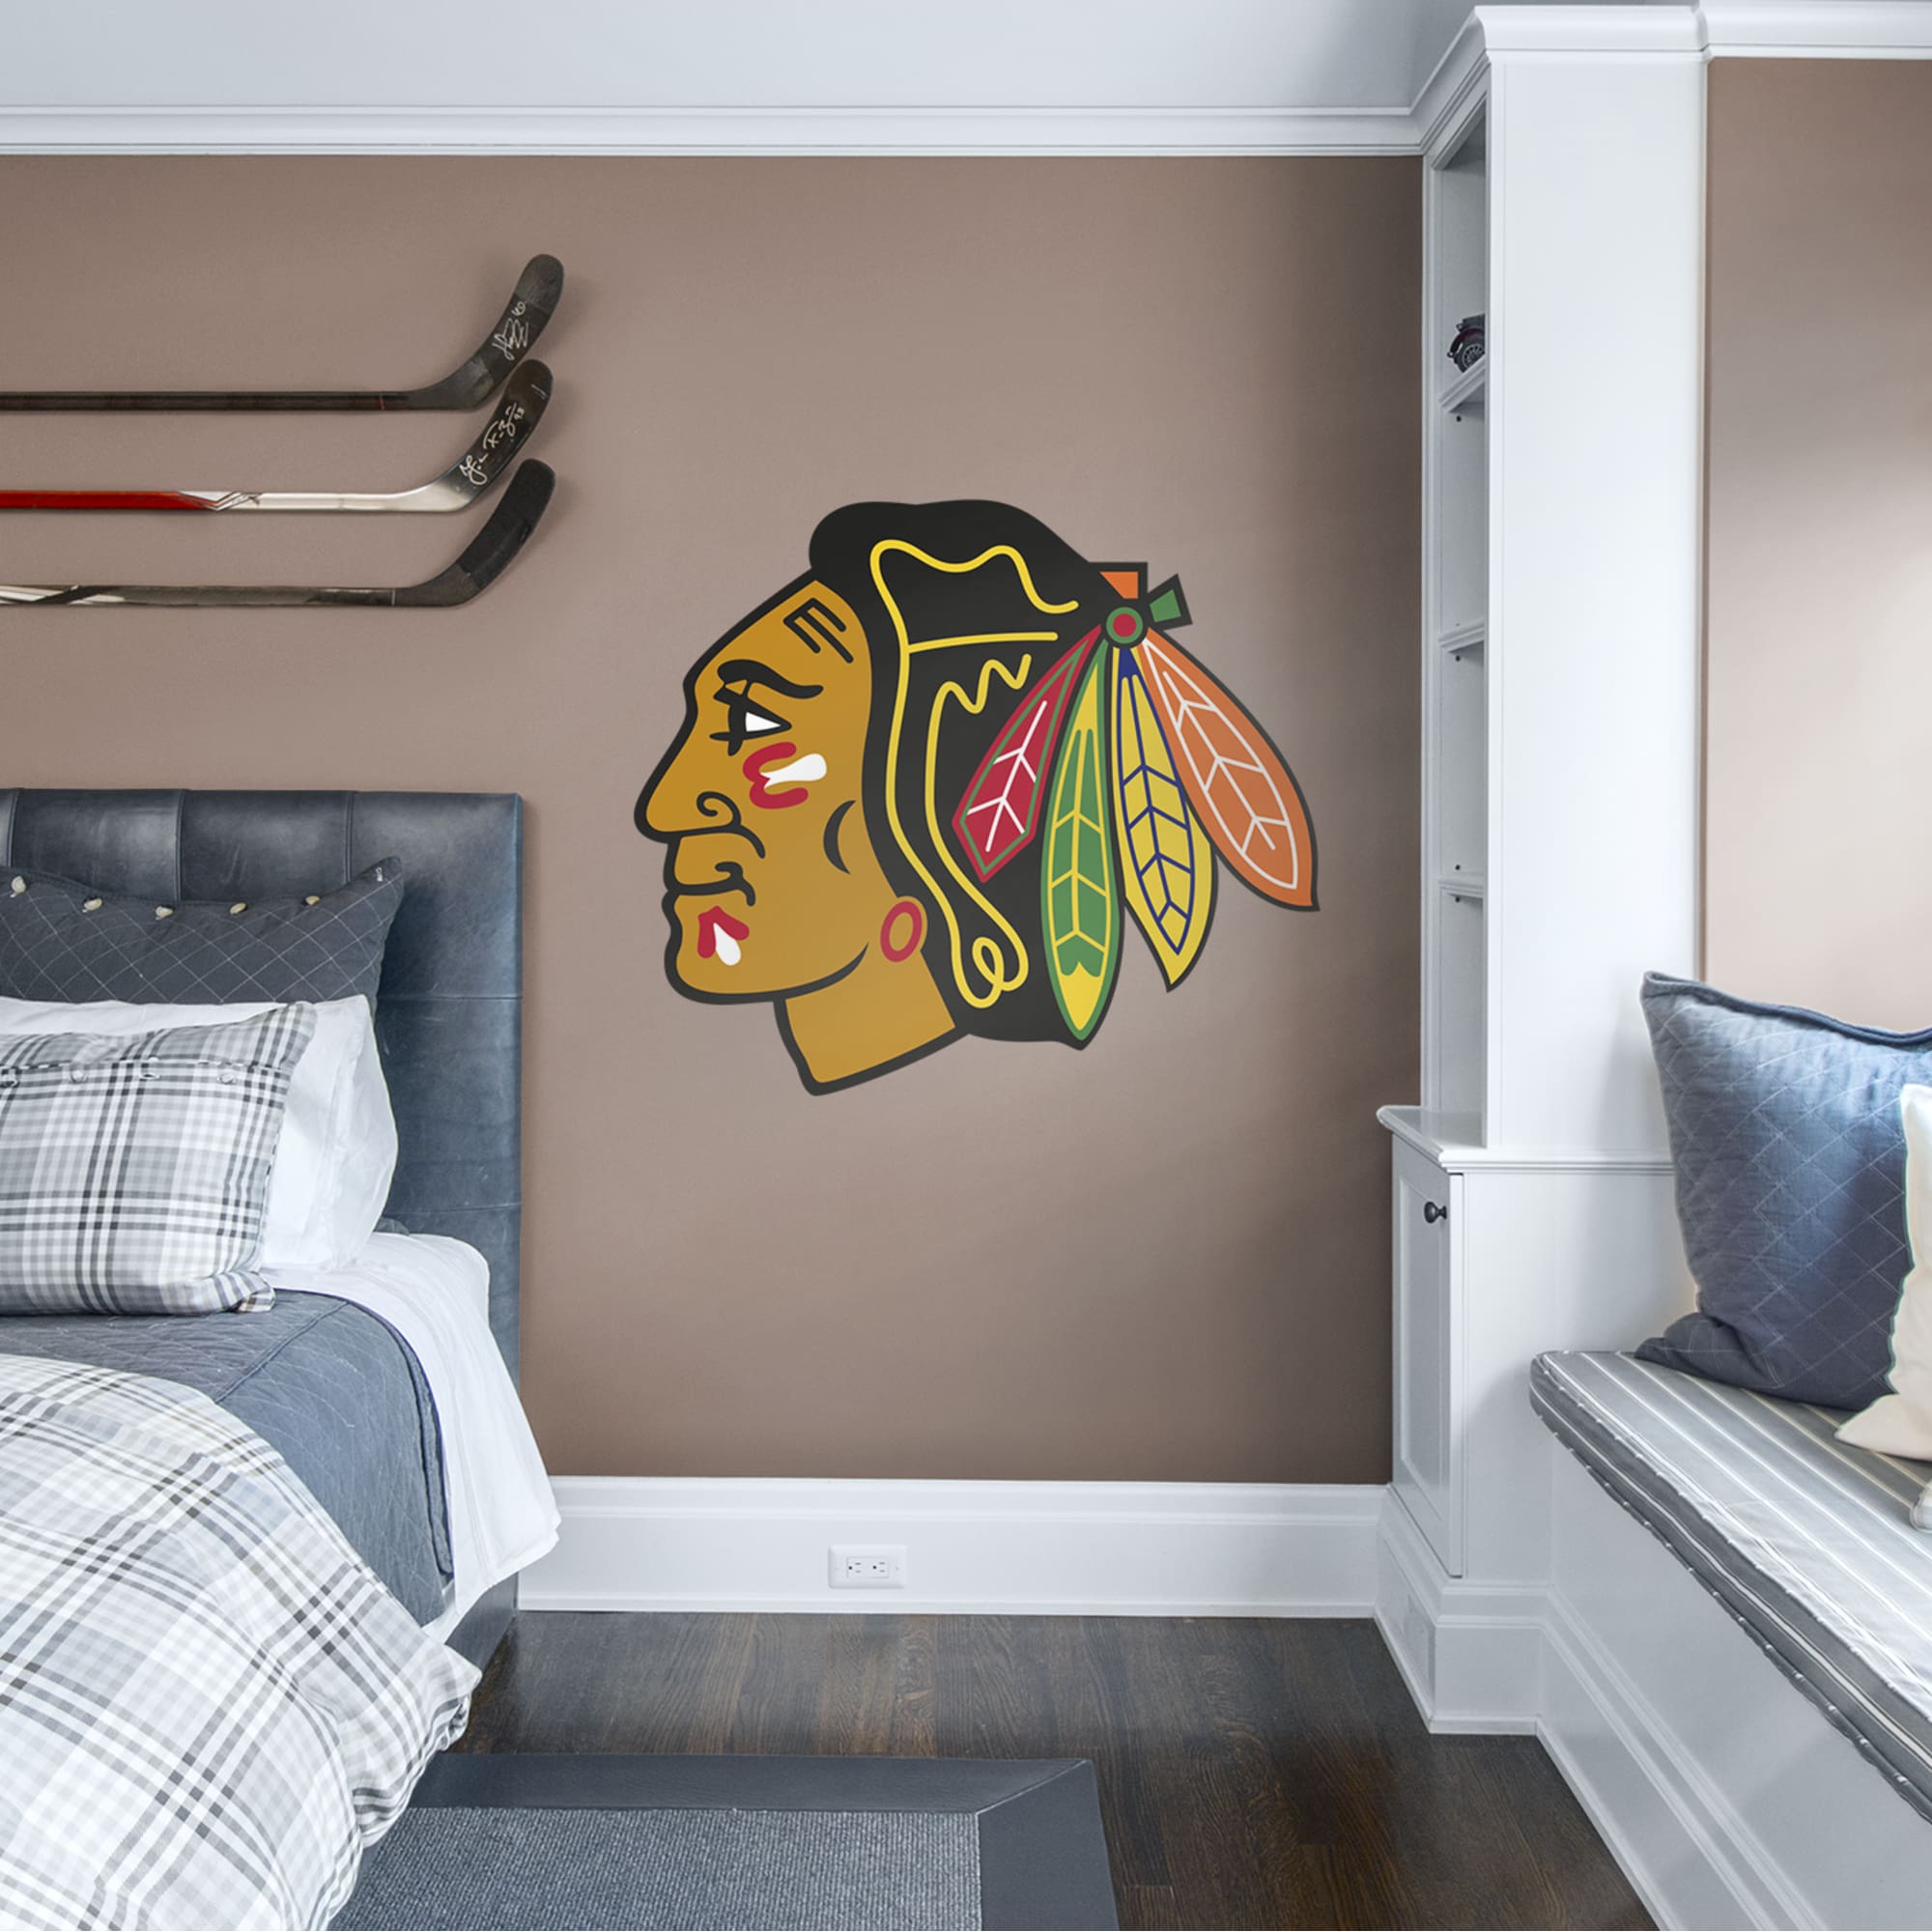 Chicago Blackhawks: Logo - Officially Licensed NHL Removable Wall Decal Giant Logo (45"W x 38"H) by Fathead | Vinyl